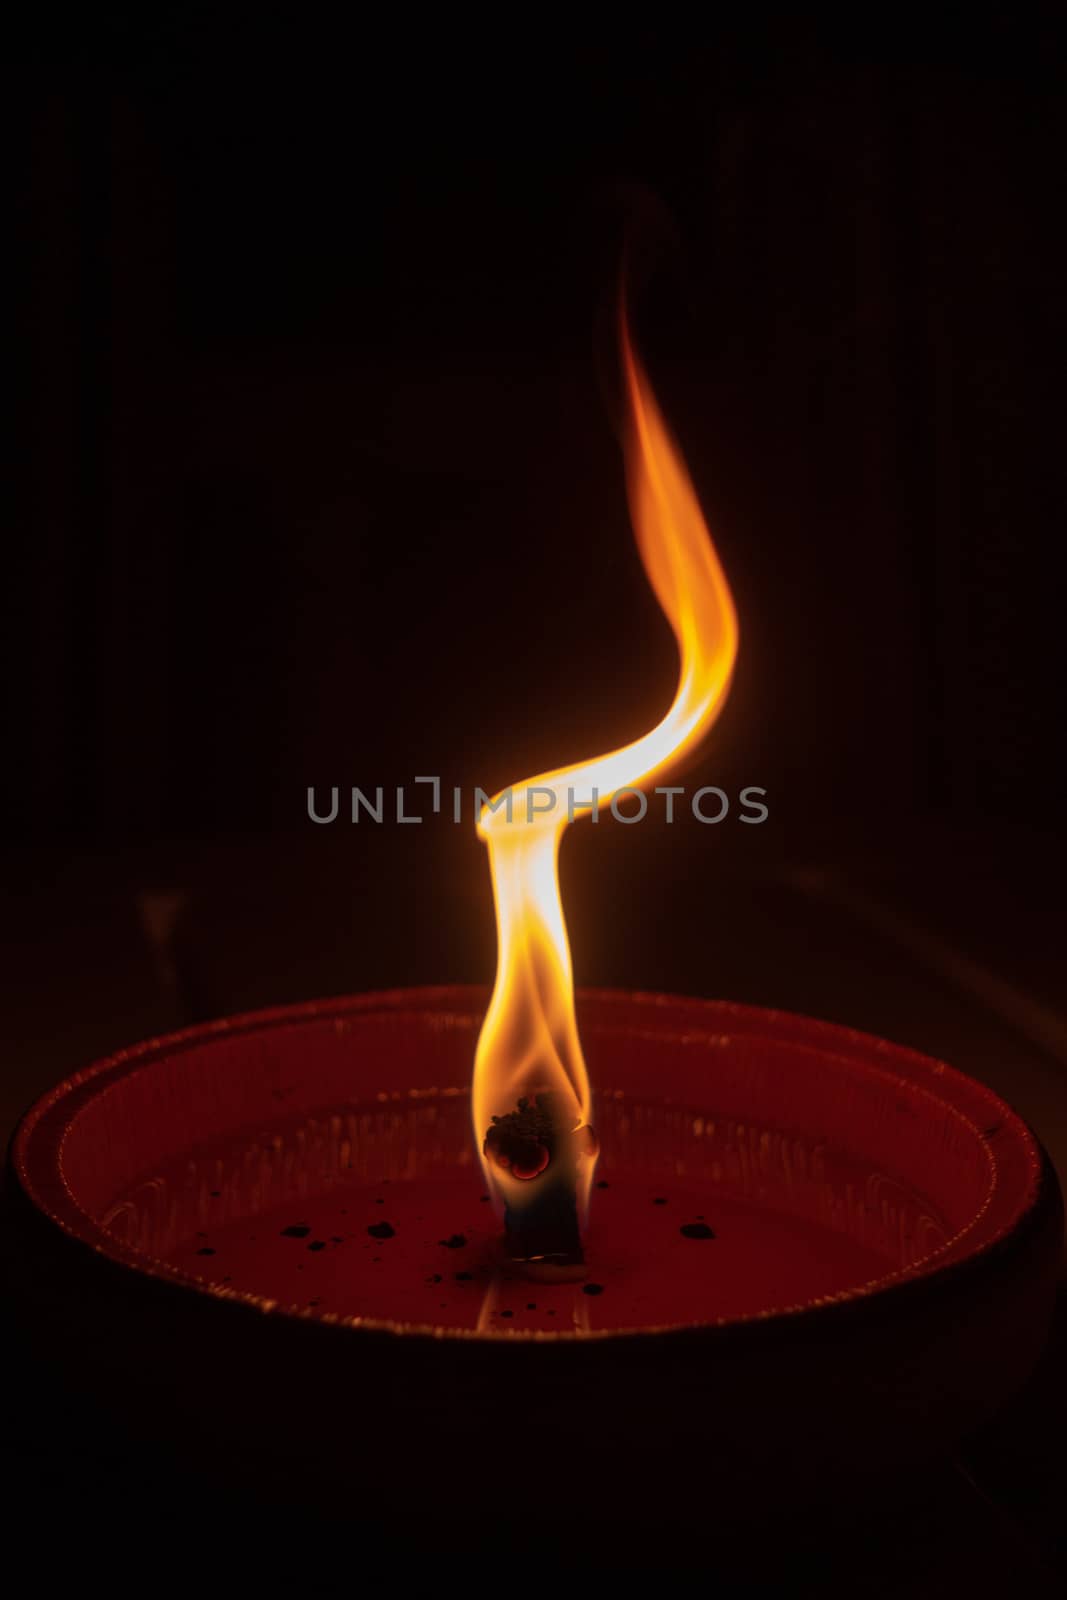 Candle flame close up on dark background, interesting flame figure, candle fire shape abstract